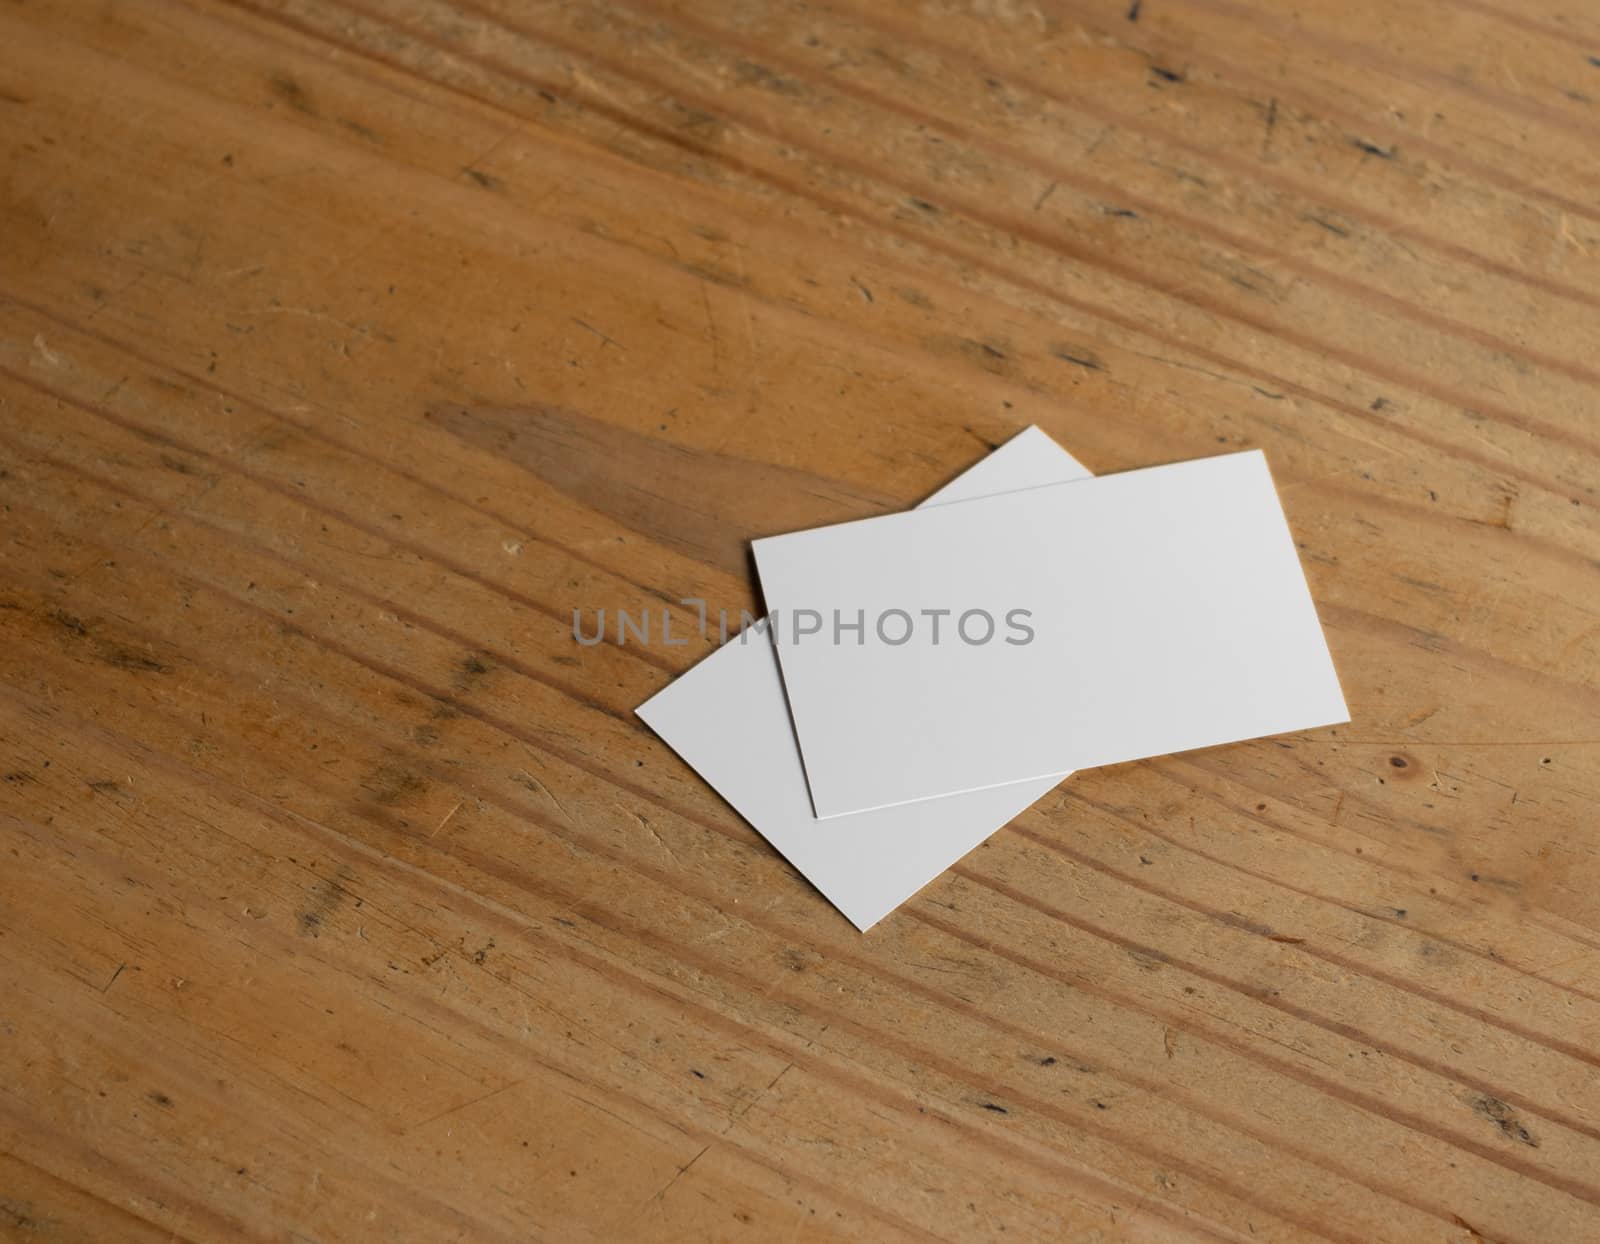 blank business cards on wooden surfaceblank business card templates on wooden surface by MarcoWarm